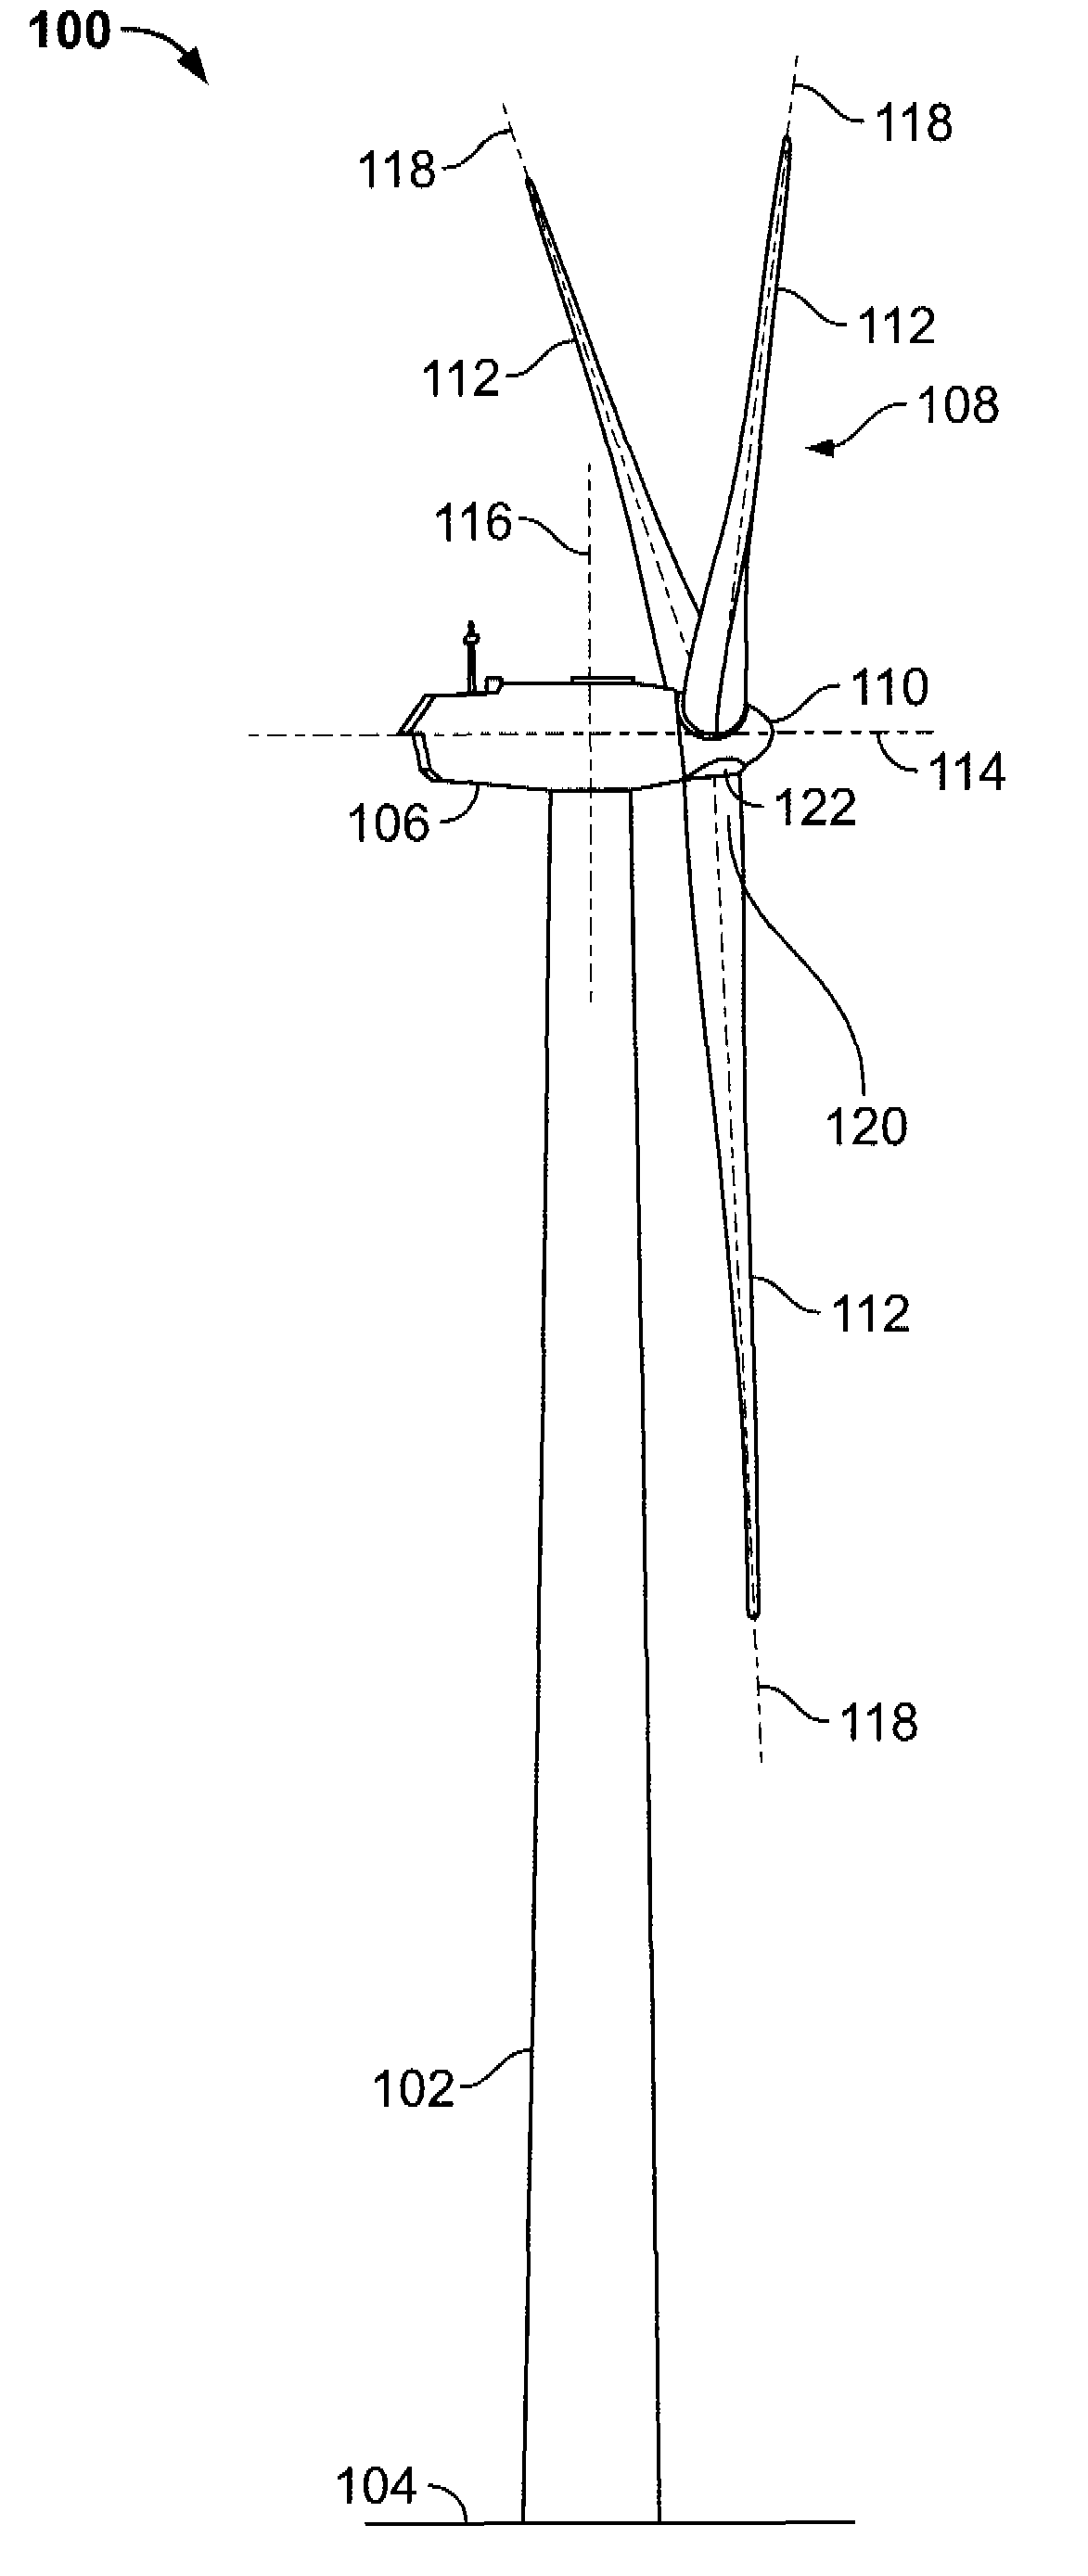 Method and apparatus of monitoring a machine